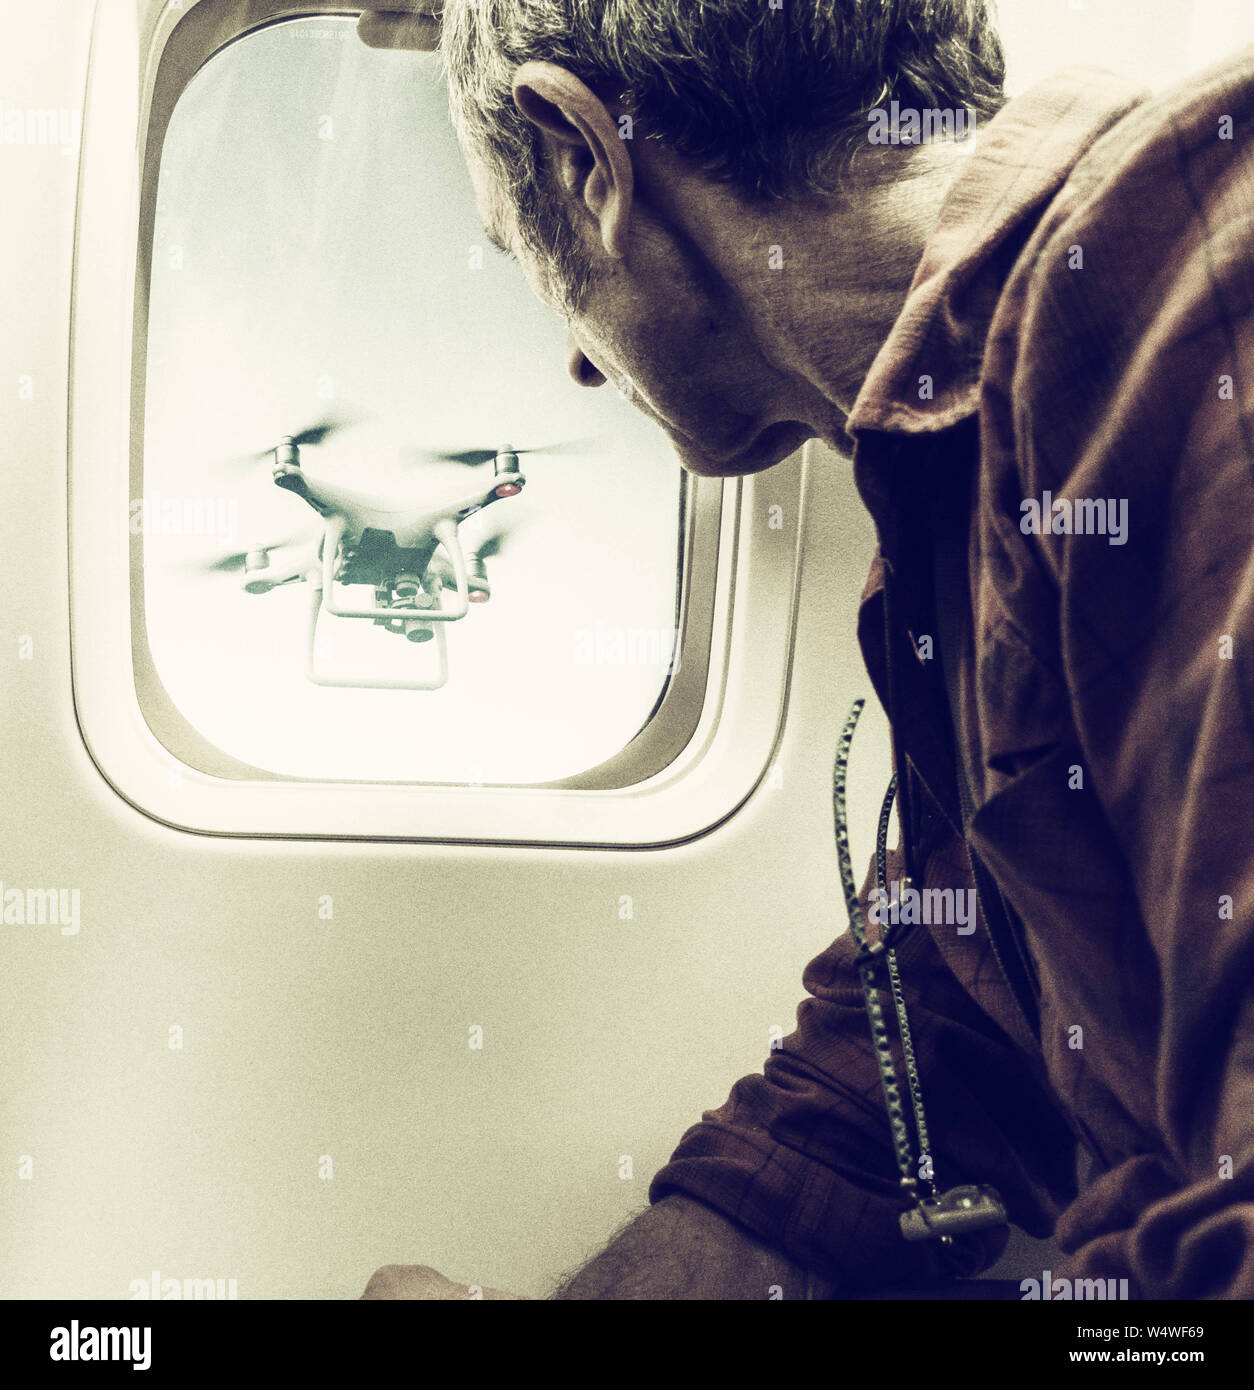 Man looking at drone through airplane window. Drone, airport concept Stock Photo